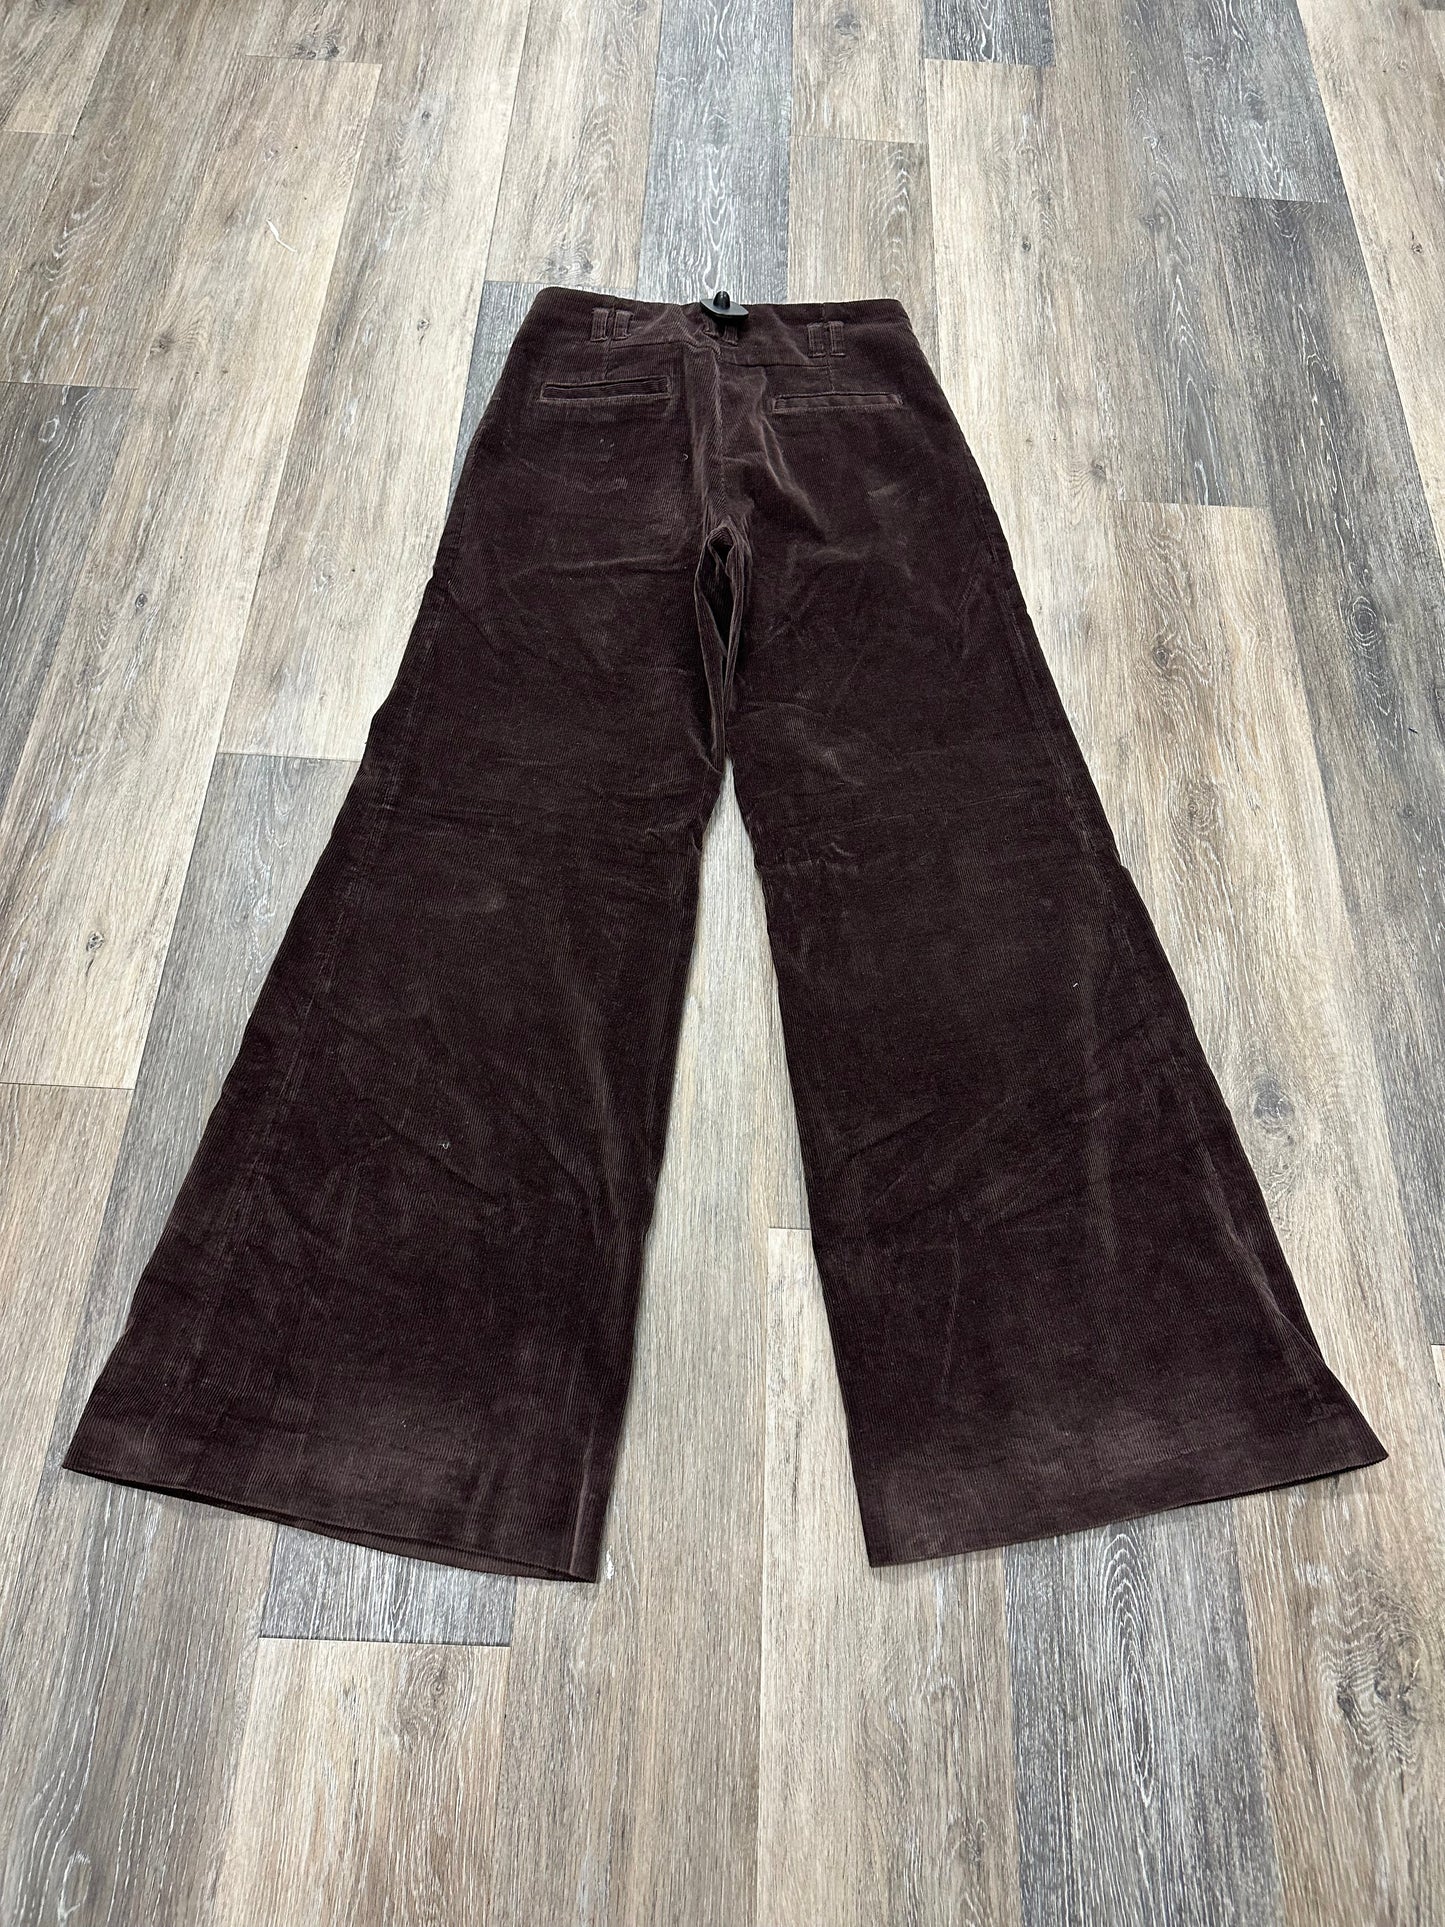 Pants Corduroy By Anthropologie  Size: 8